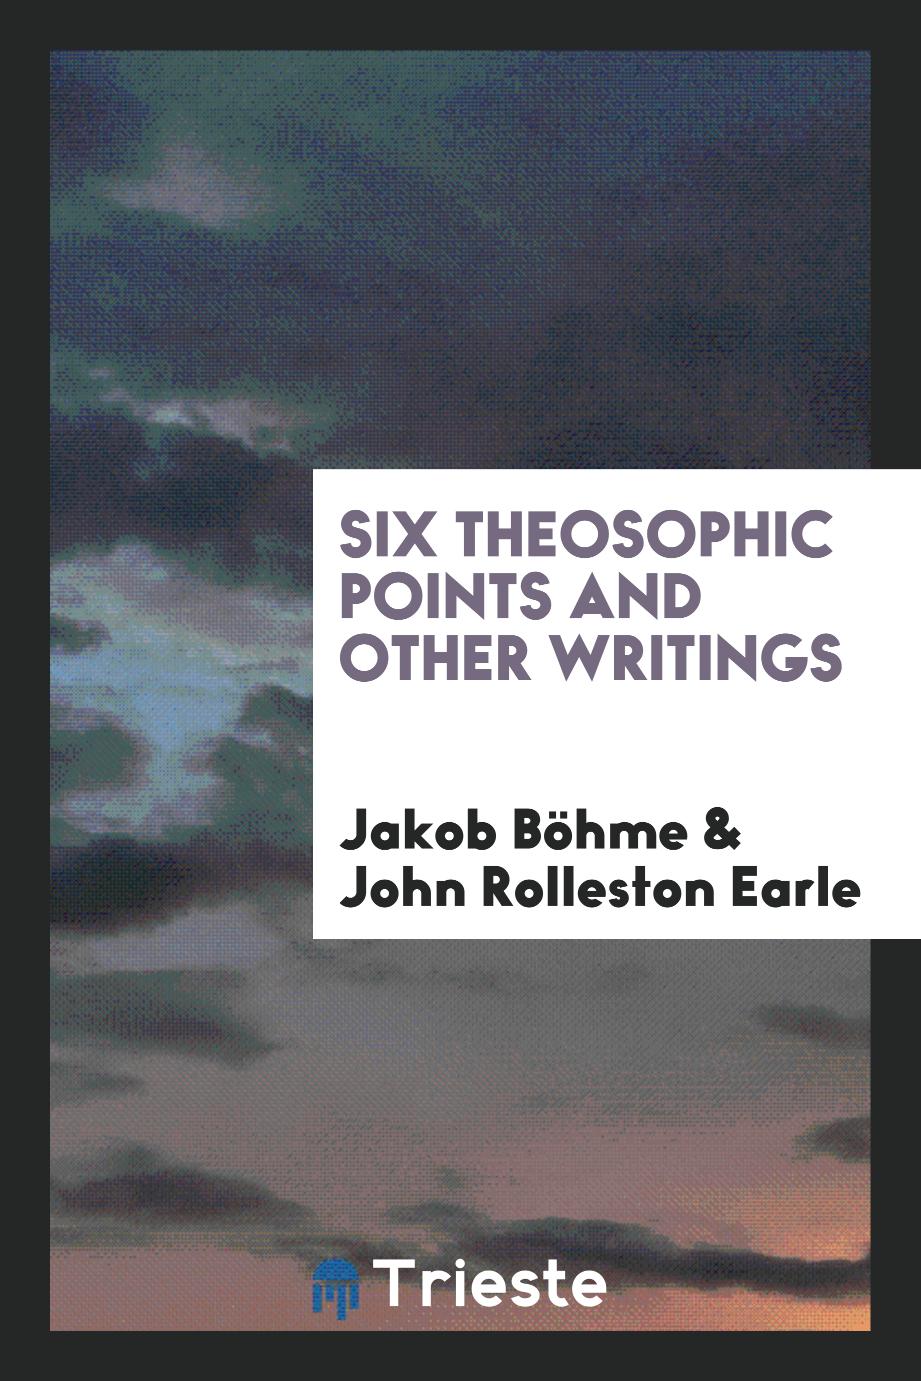 Six theosophic points and other writings